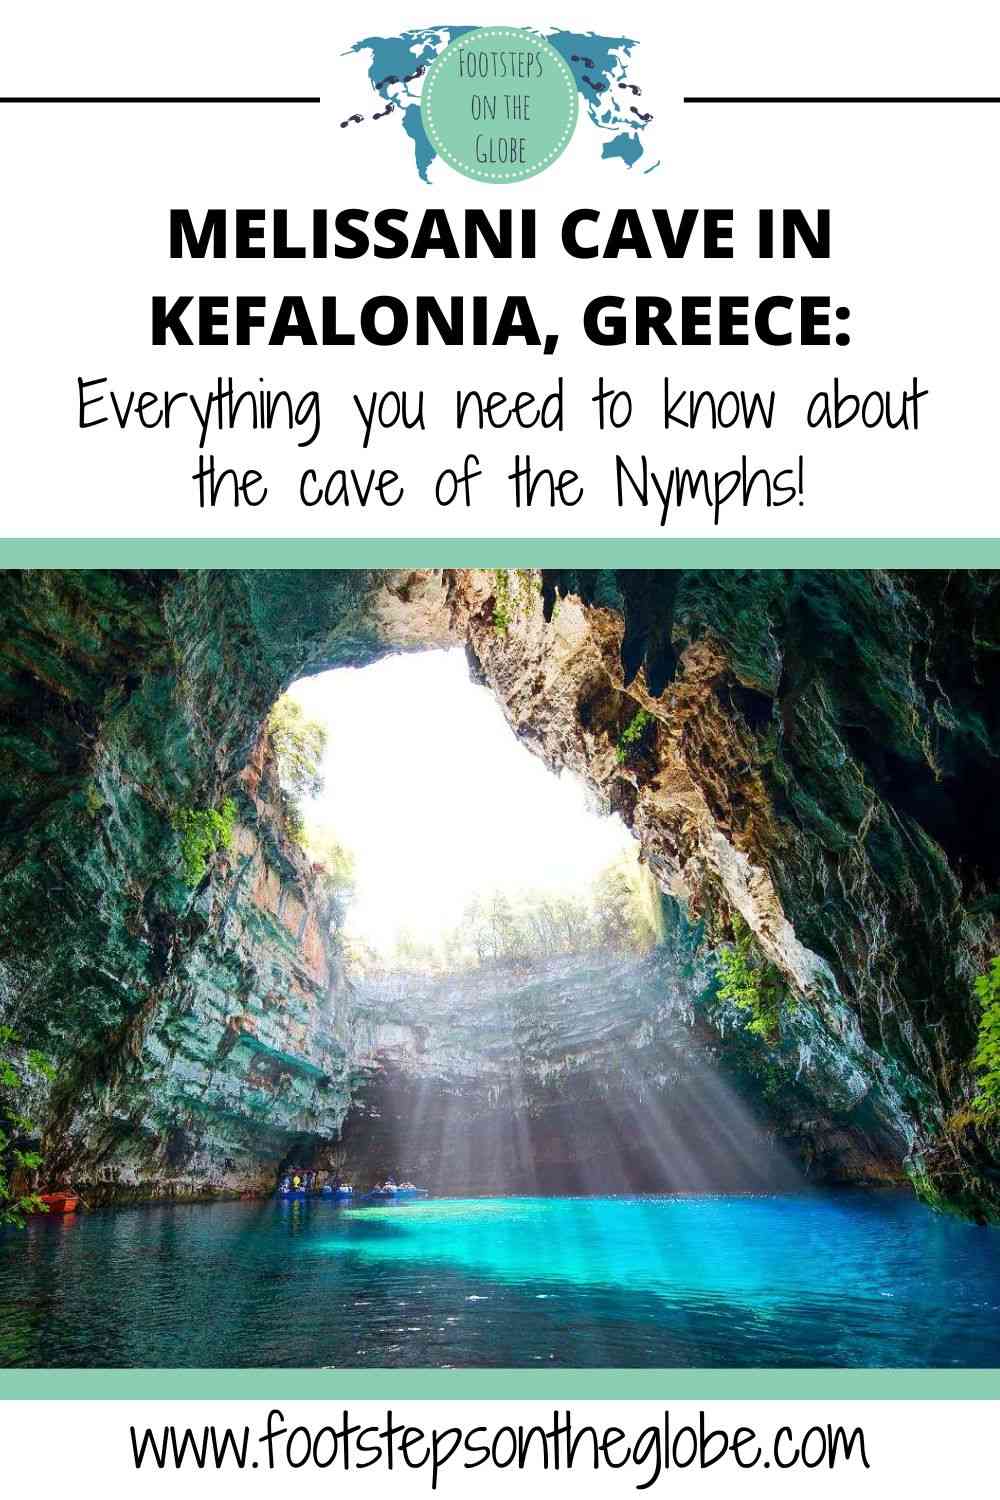 Pinterest image of Melissani Cave in Kefalonia, Greece with the text: "MELISSANI CAVE: Everything you need to know about the cave of the Nymphs!"